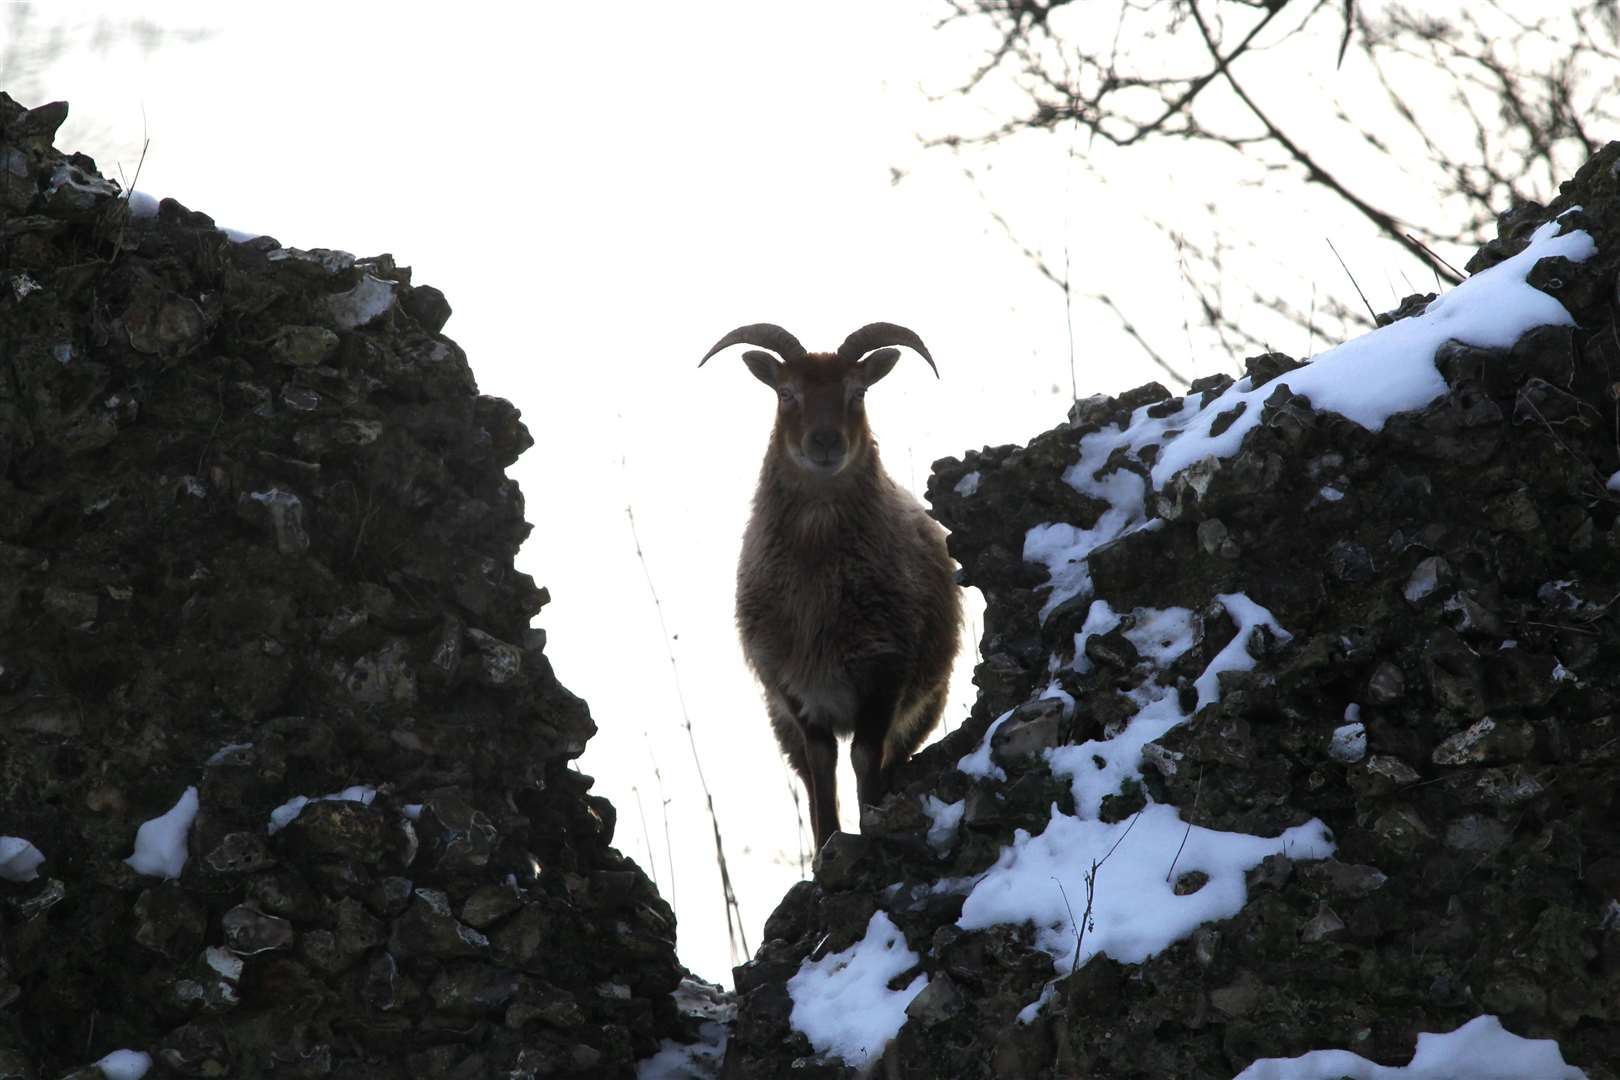 Like a sentinel, a goat peers through the broken wall of Thurnham Castle. Picture: John Westhrop